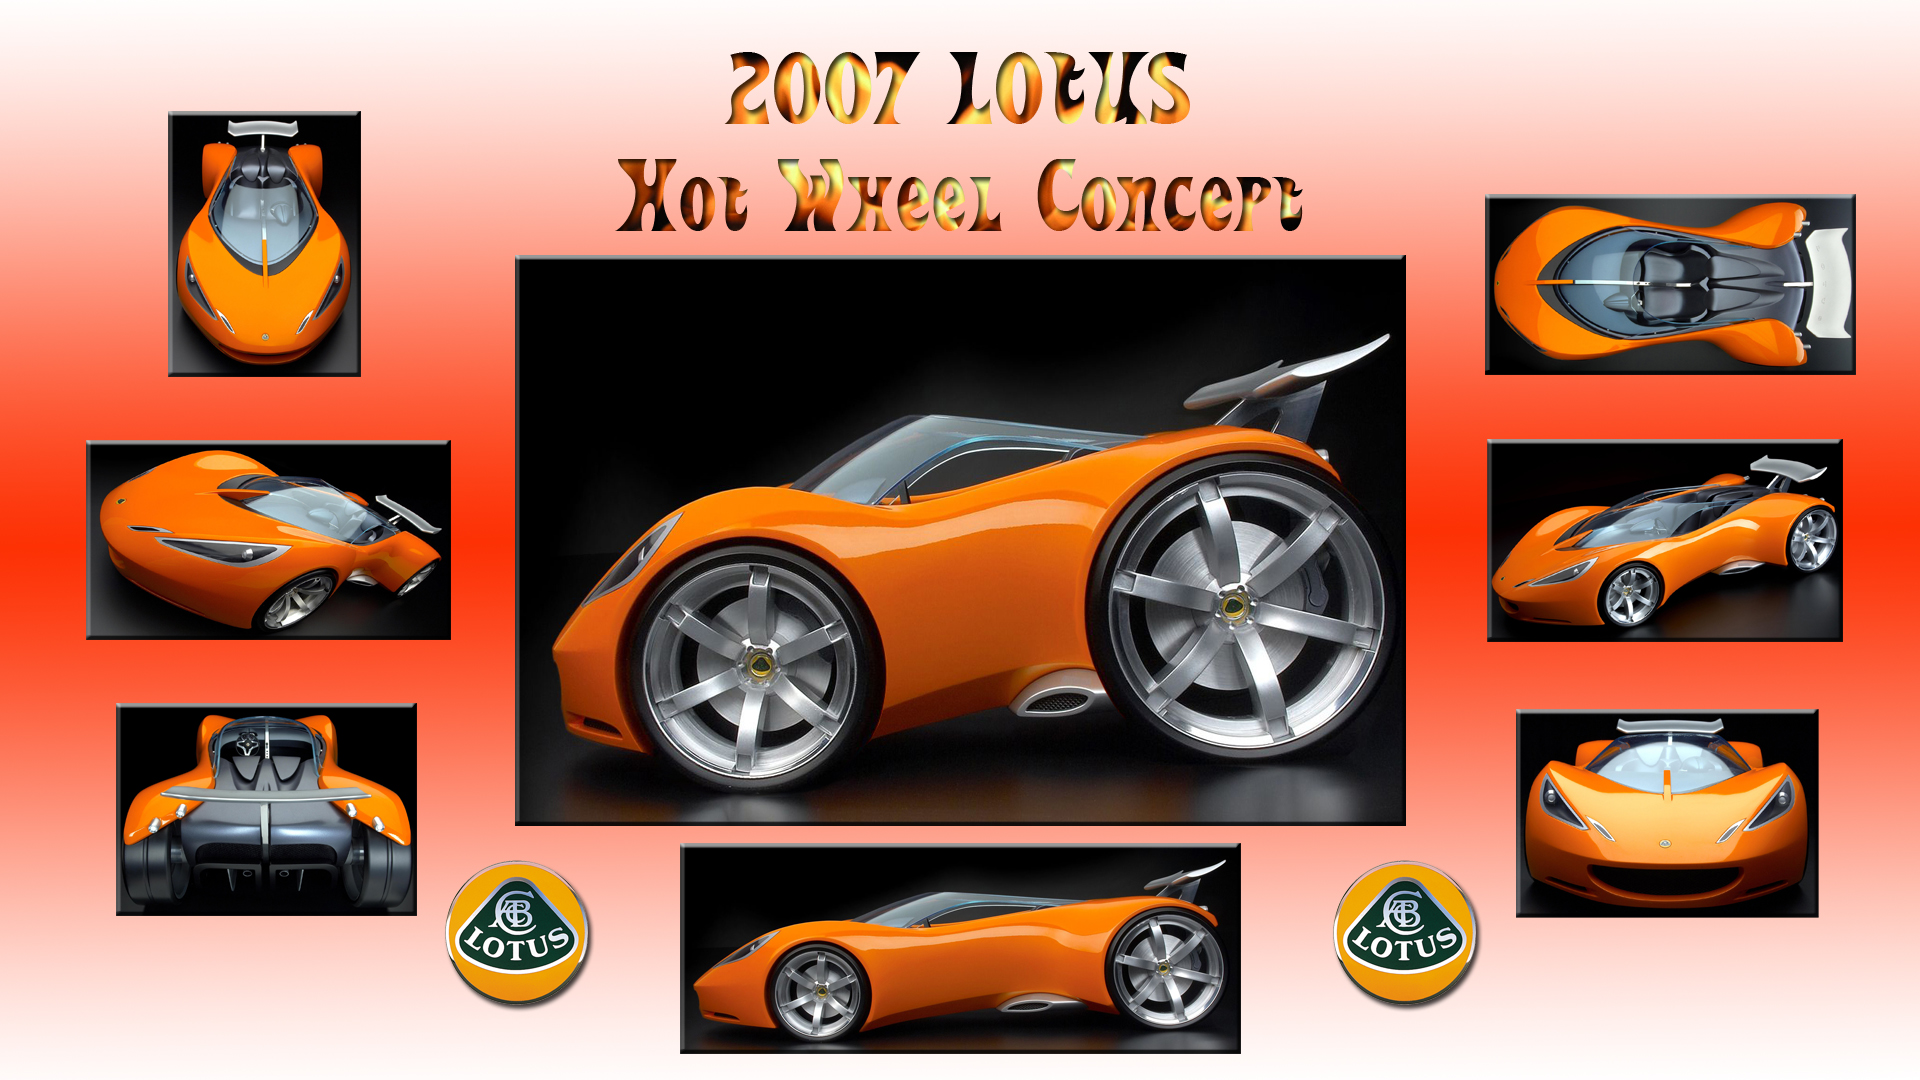 Lotus Hot Wheels Concept Backgrounds on Wallpapers Vista